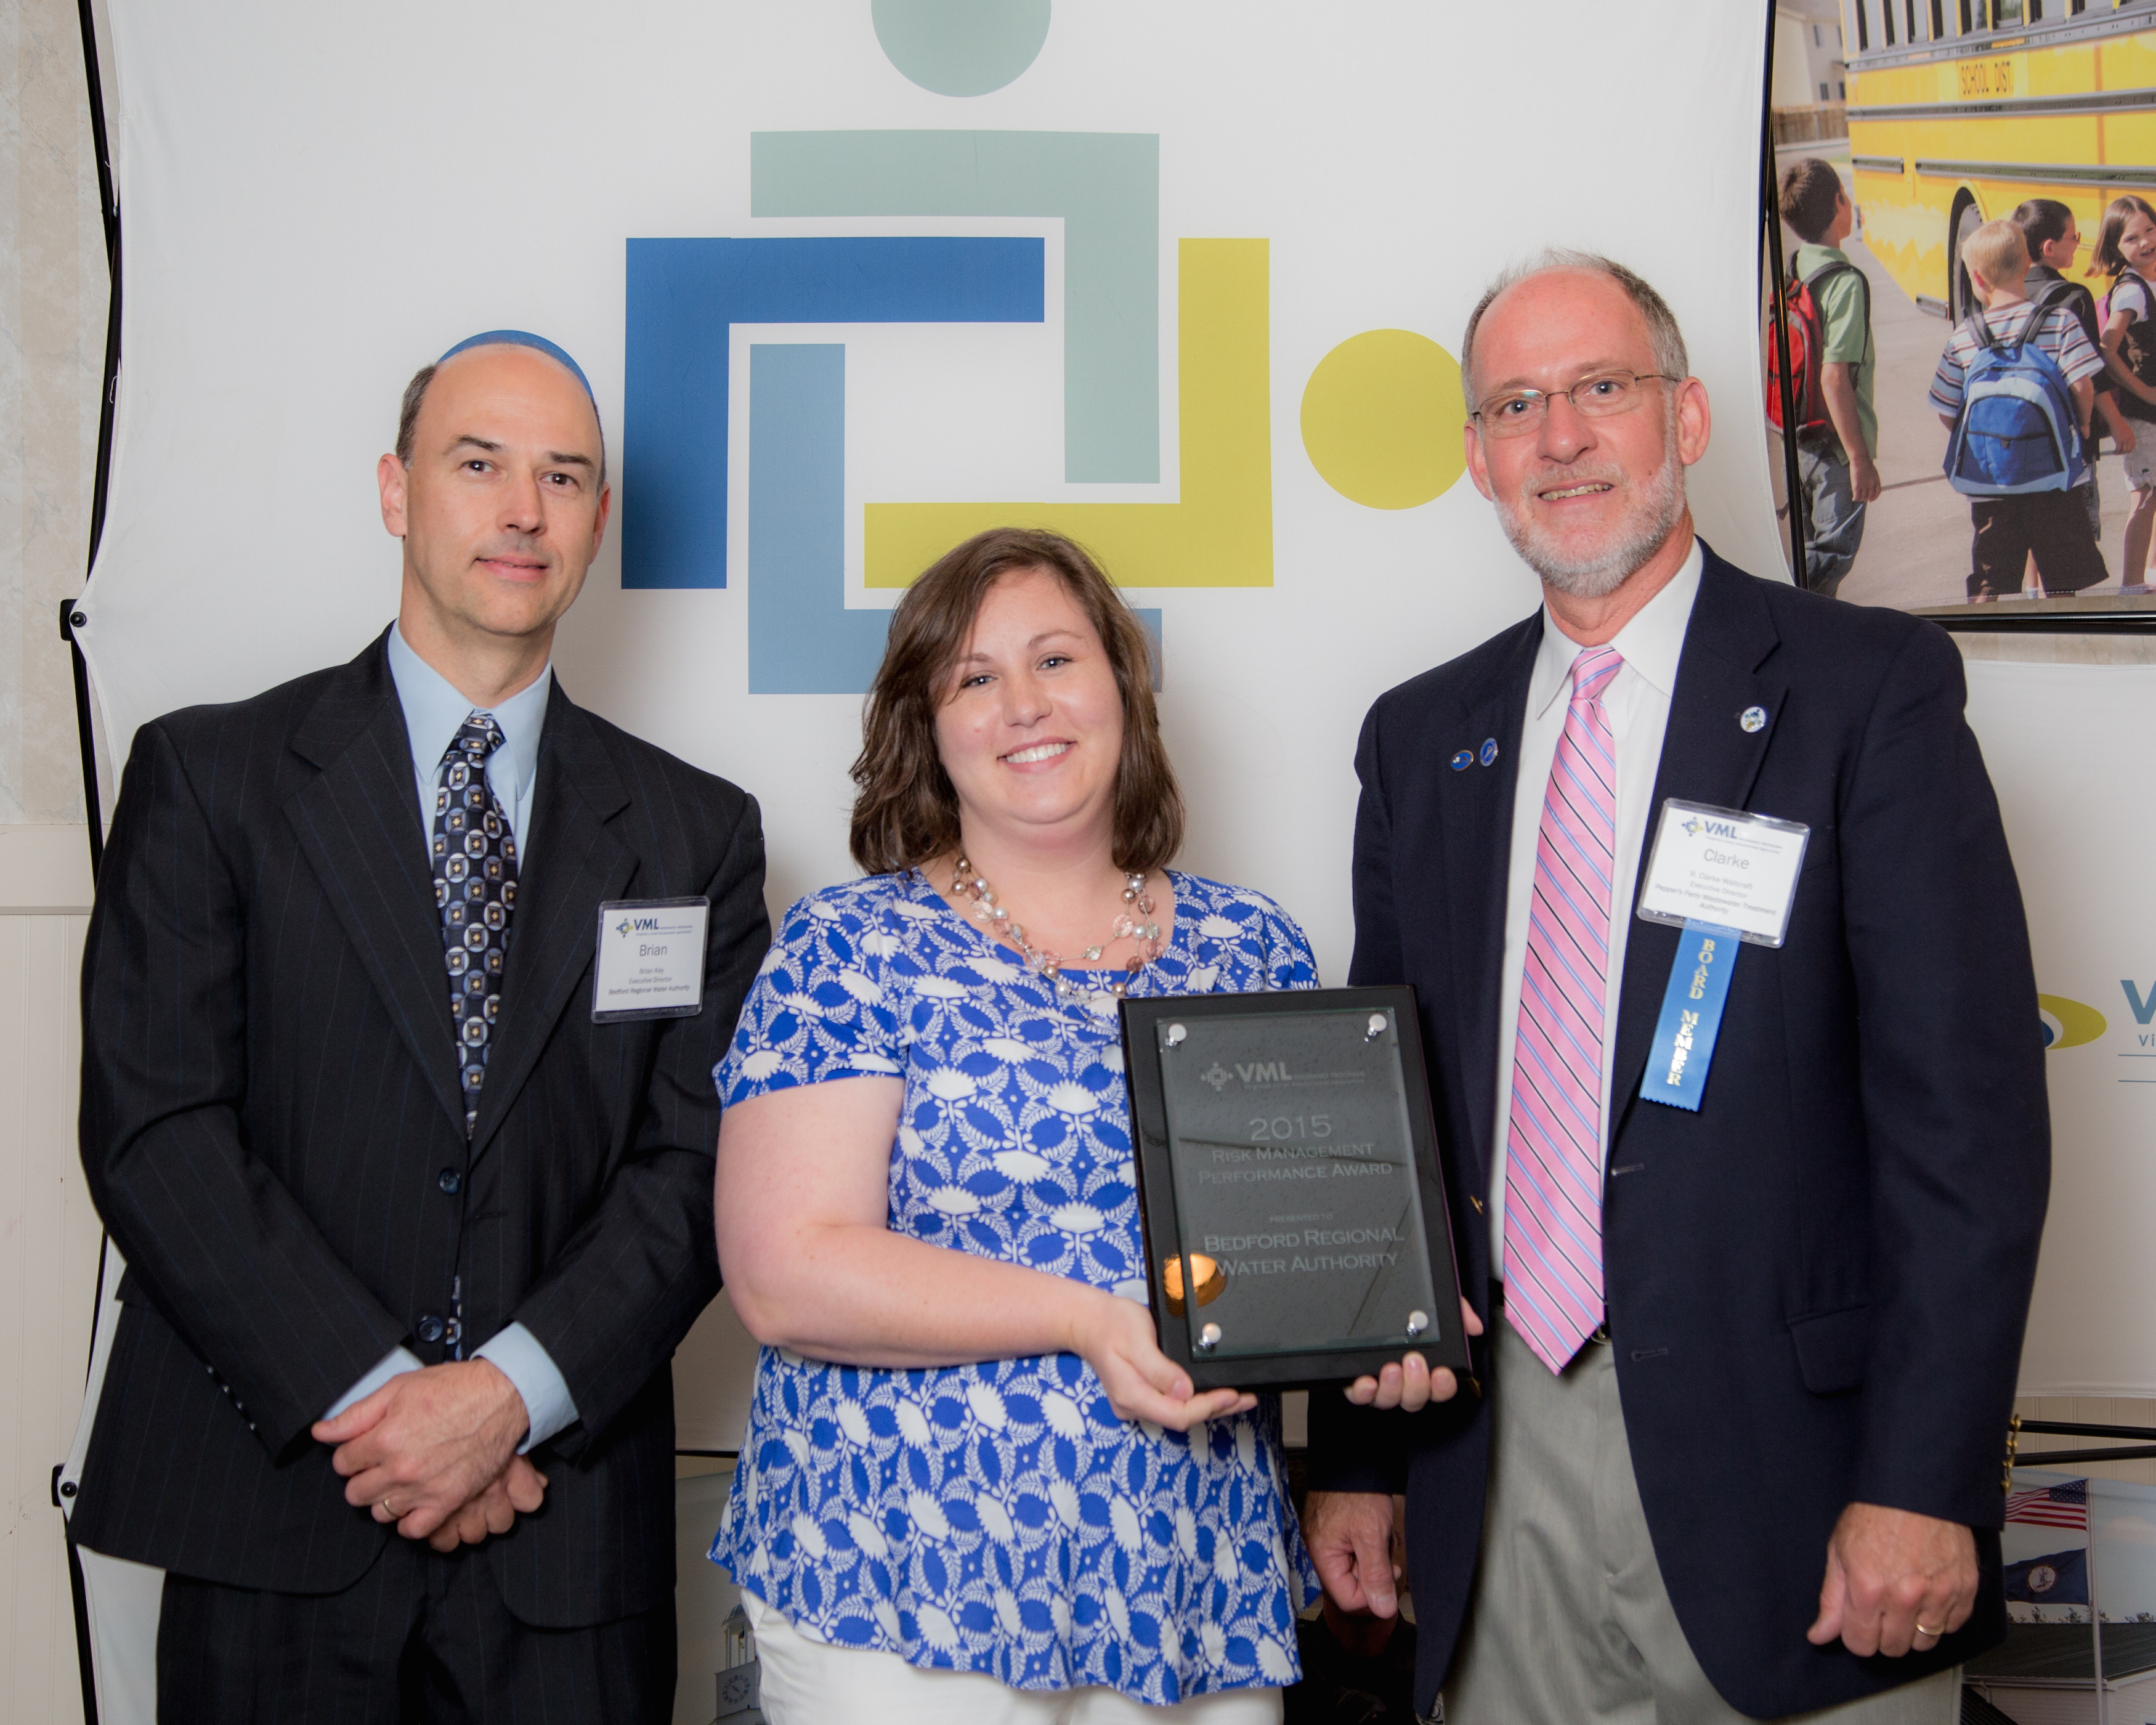 (L to R): Bedford Regional Water Authority Executive Director Brian Key and HR Manager Bethany Shamblin accept the award with VMLIP Members’ Supervisory Board Member Clarke Wallcraft 